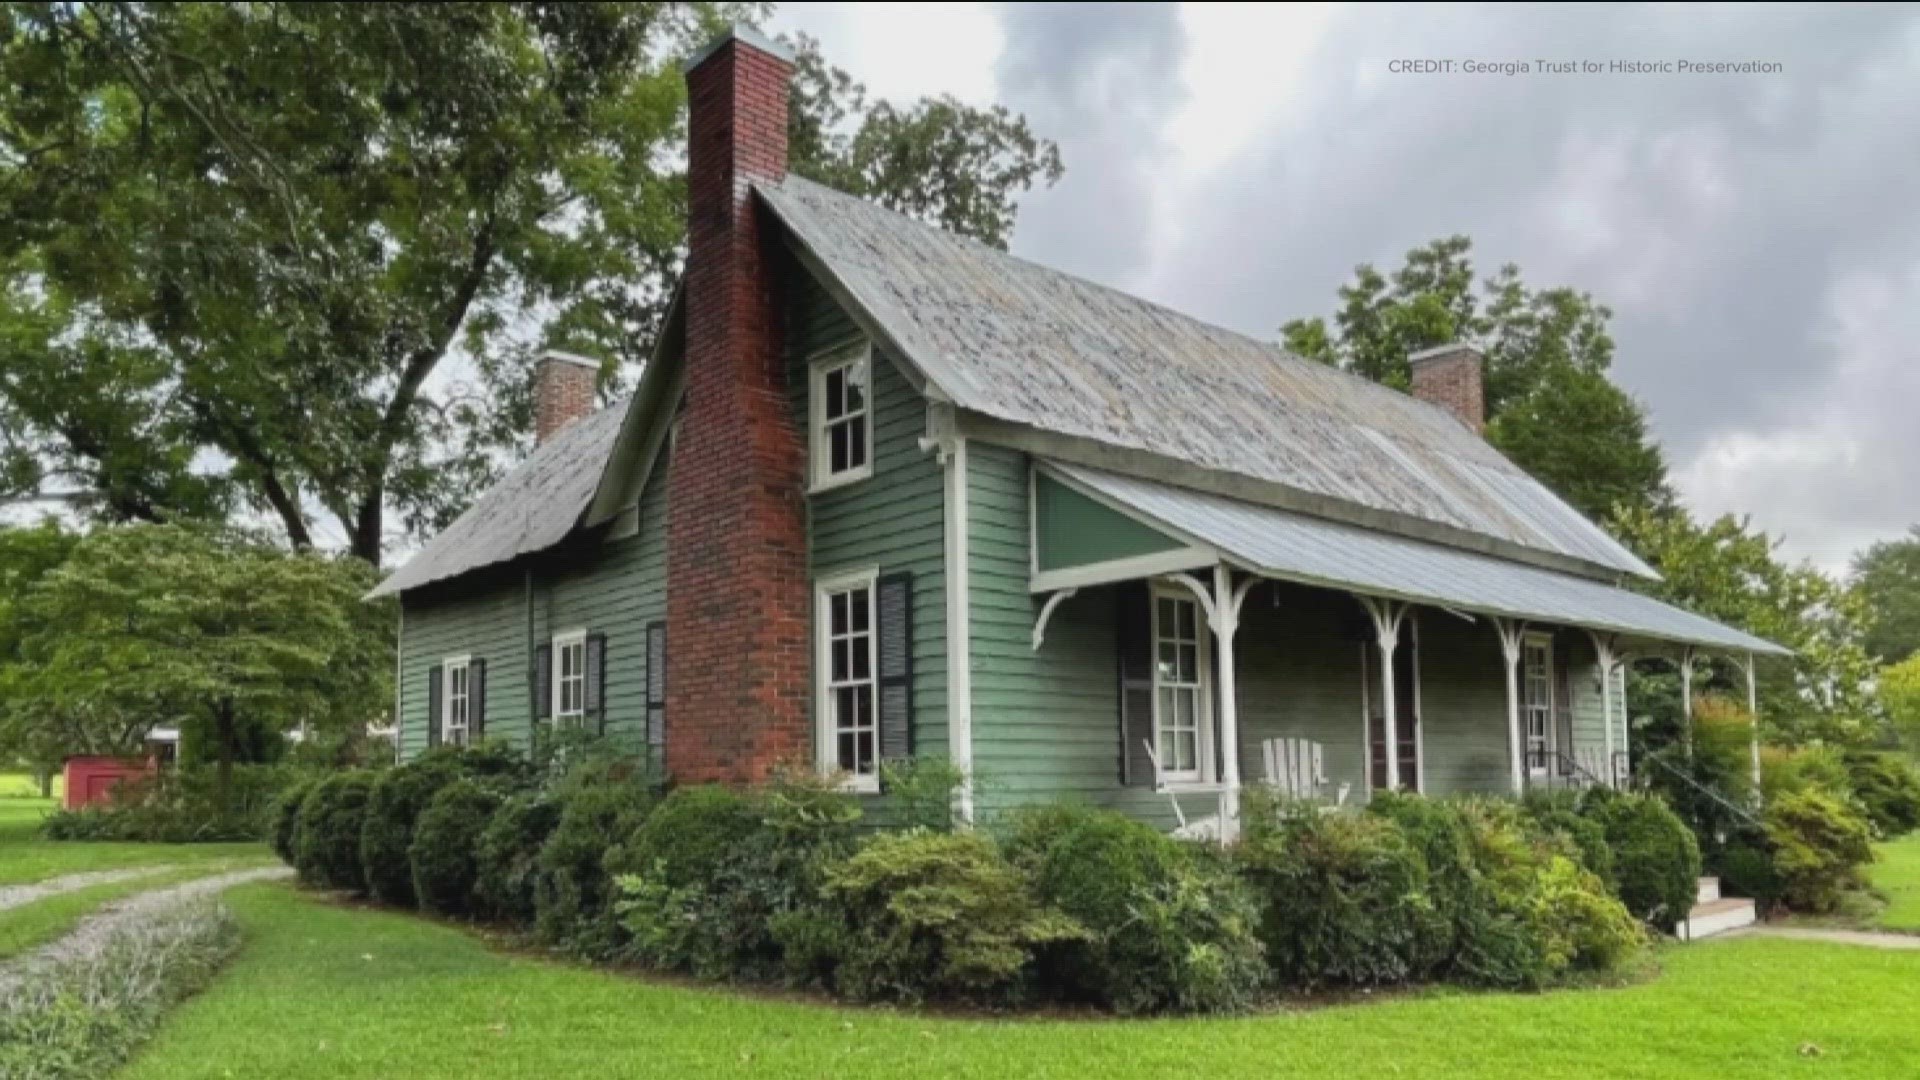 The historic Pierce Hembree House in Roswell has a new owner